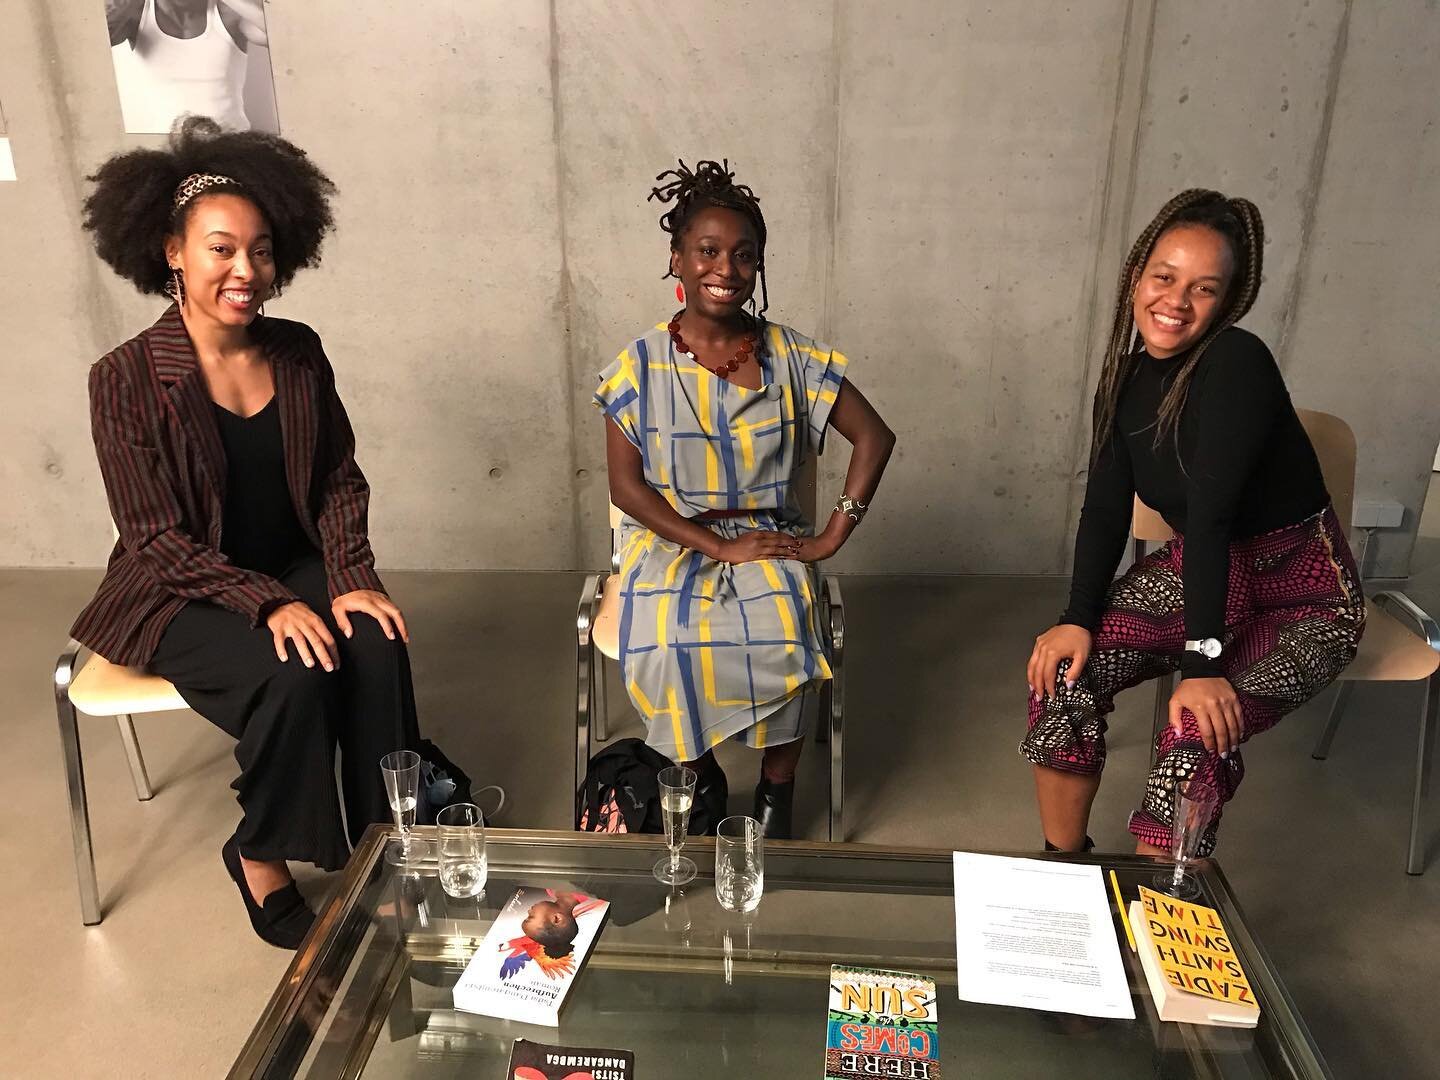 Yesterday, after reading some literary texts from some of our favourite, Black, femme authors picked by @mkay_reads, we shared exclusive interviews with Tsitsi Dangarembga and Dr Mehita Iqani. ✨

Finally, our fave @bonhomme joined us for a discussion